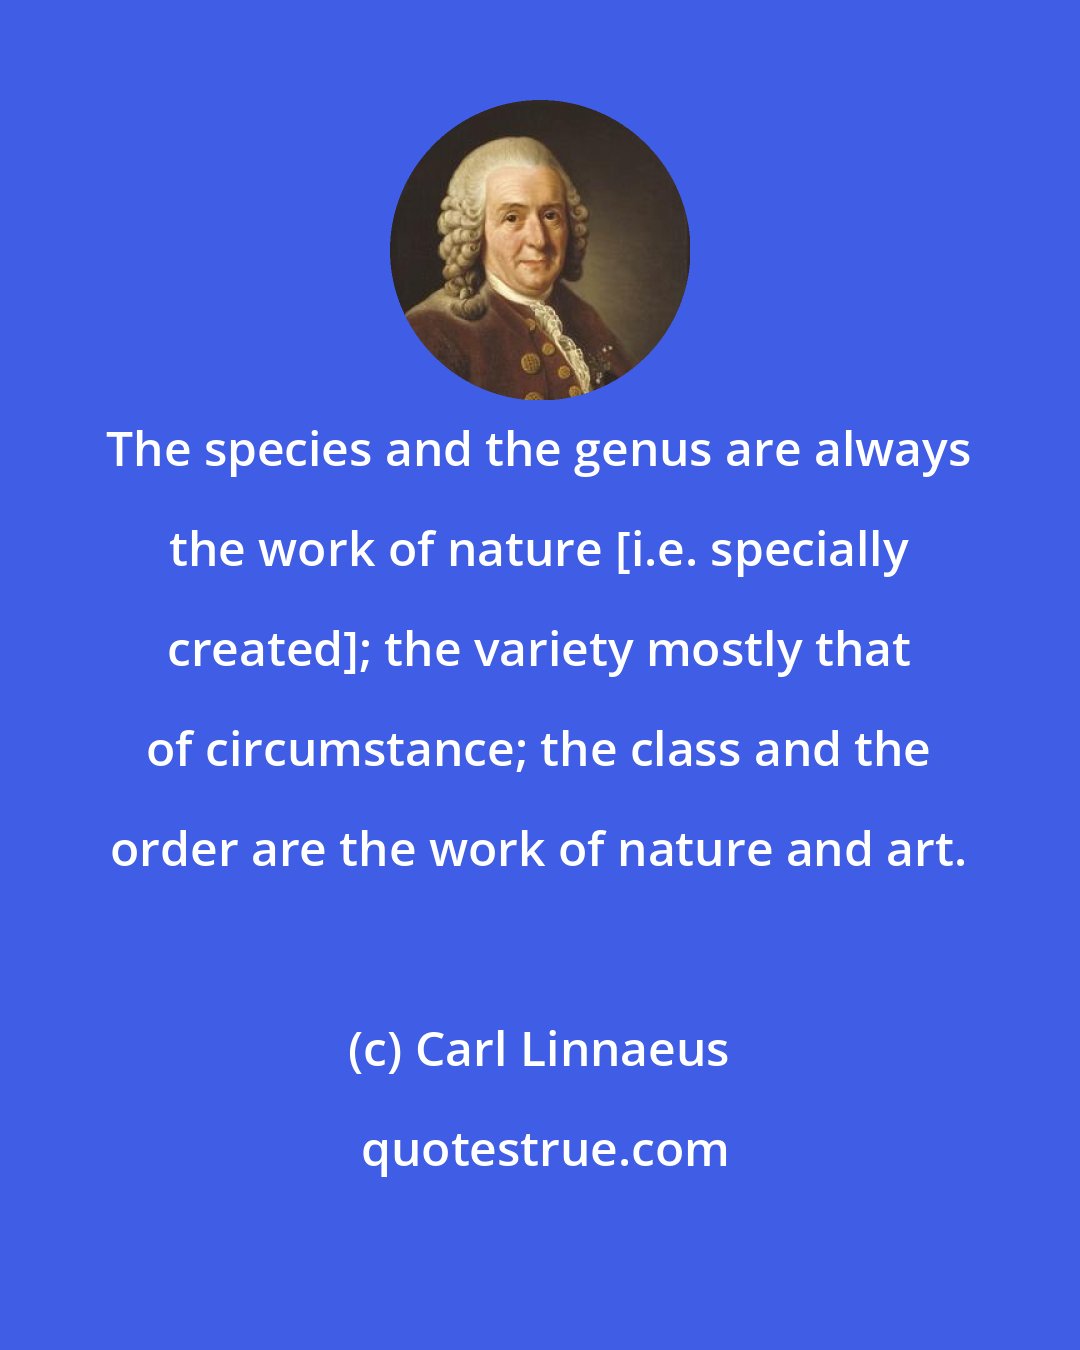 Carl Linnaeus: The species and the genus are always the work of nature [i.e. specially created]; the variety mostly that of circumstance; the class and the order are the work of nature and art.